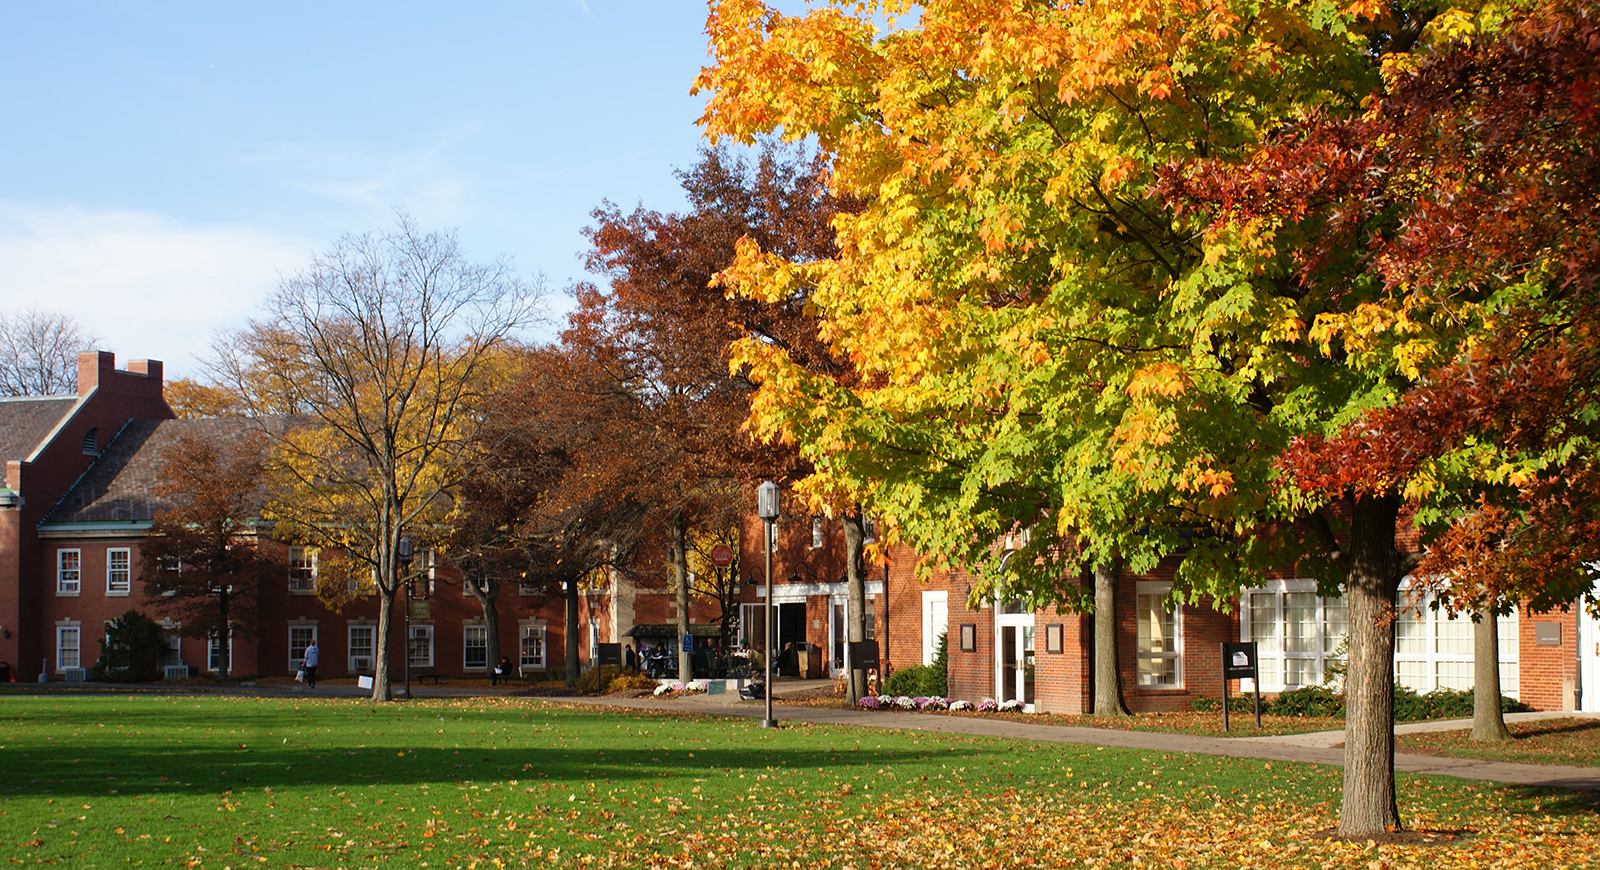 Photo of Chatham University's Shadyside Campus in the fall with colorful leaves and green academic quads.